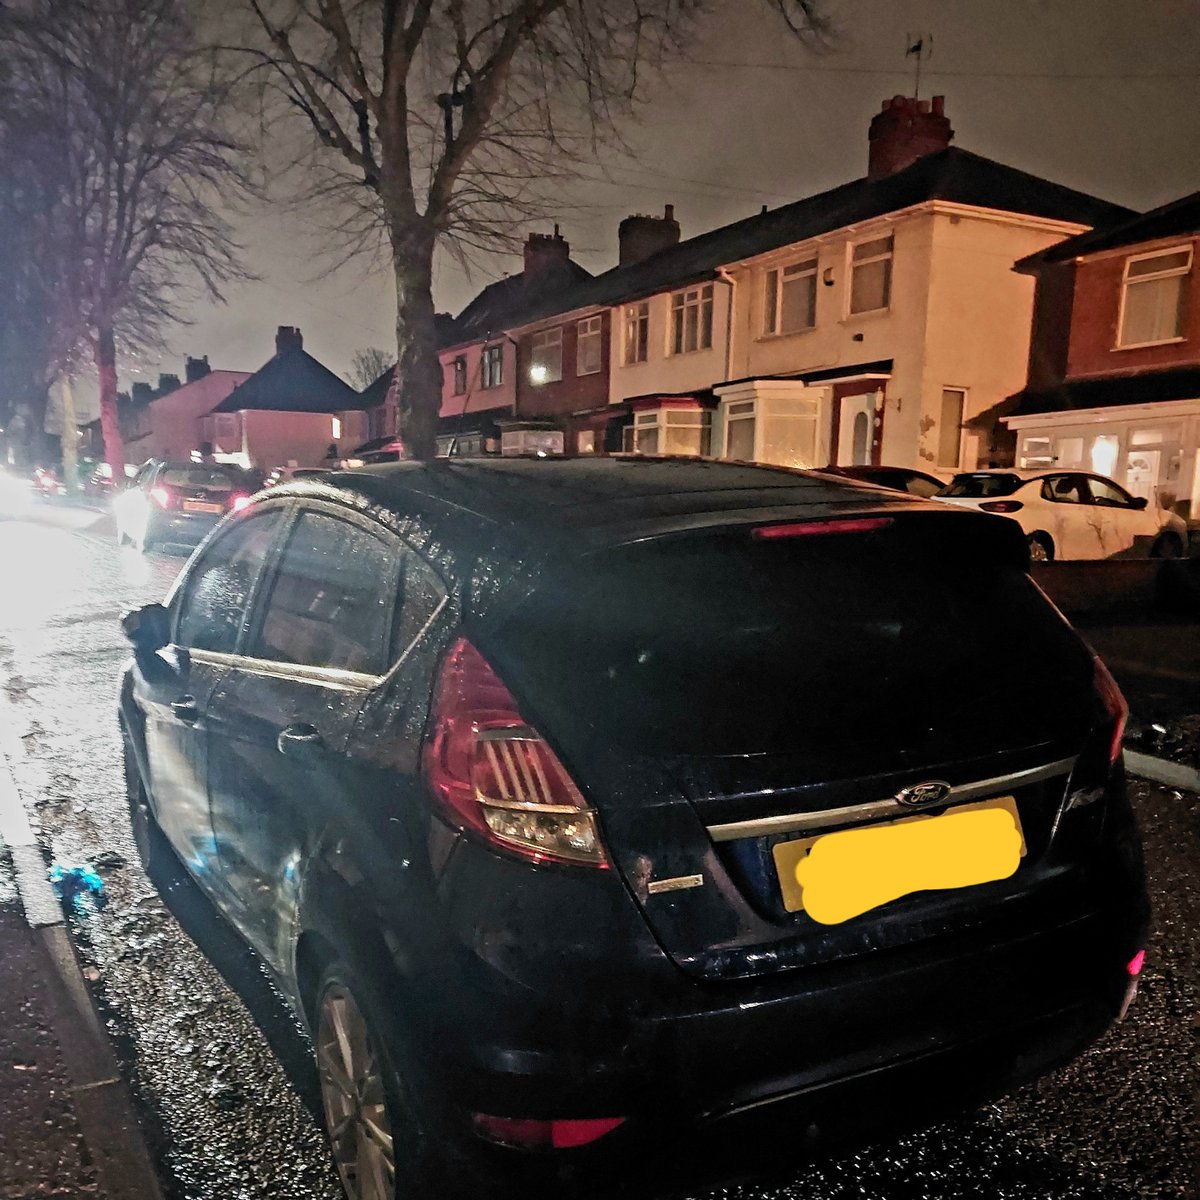 Team 1: Officers patrolled #AlumRock and #BordesleyGreen last night. 2 vehicles were siezed for no insurance and 1 driver issued a ticket for driving with no license. #OpElevate #2for1 #needalicenseforthatmate